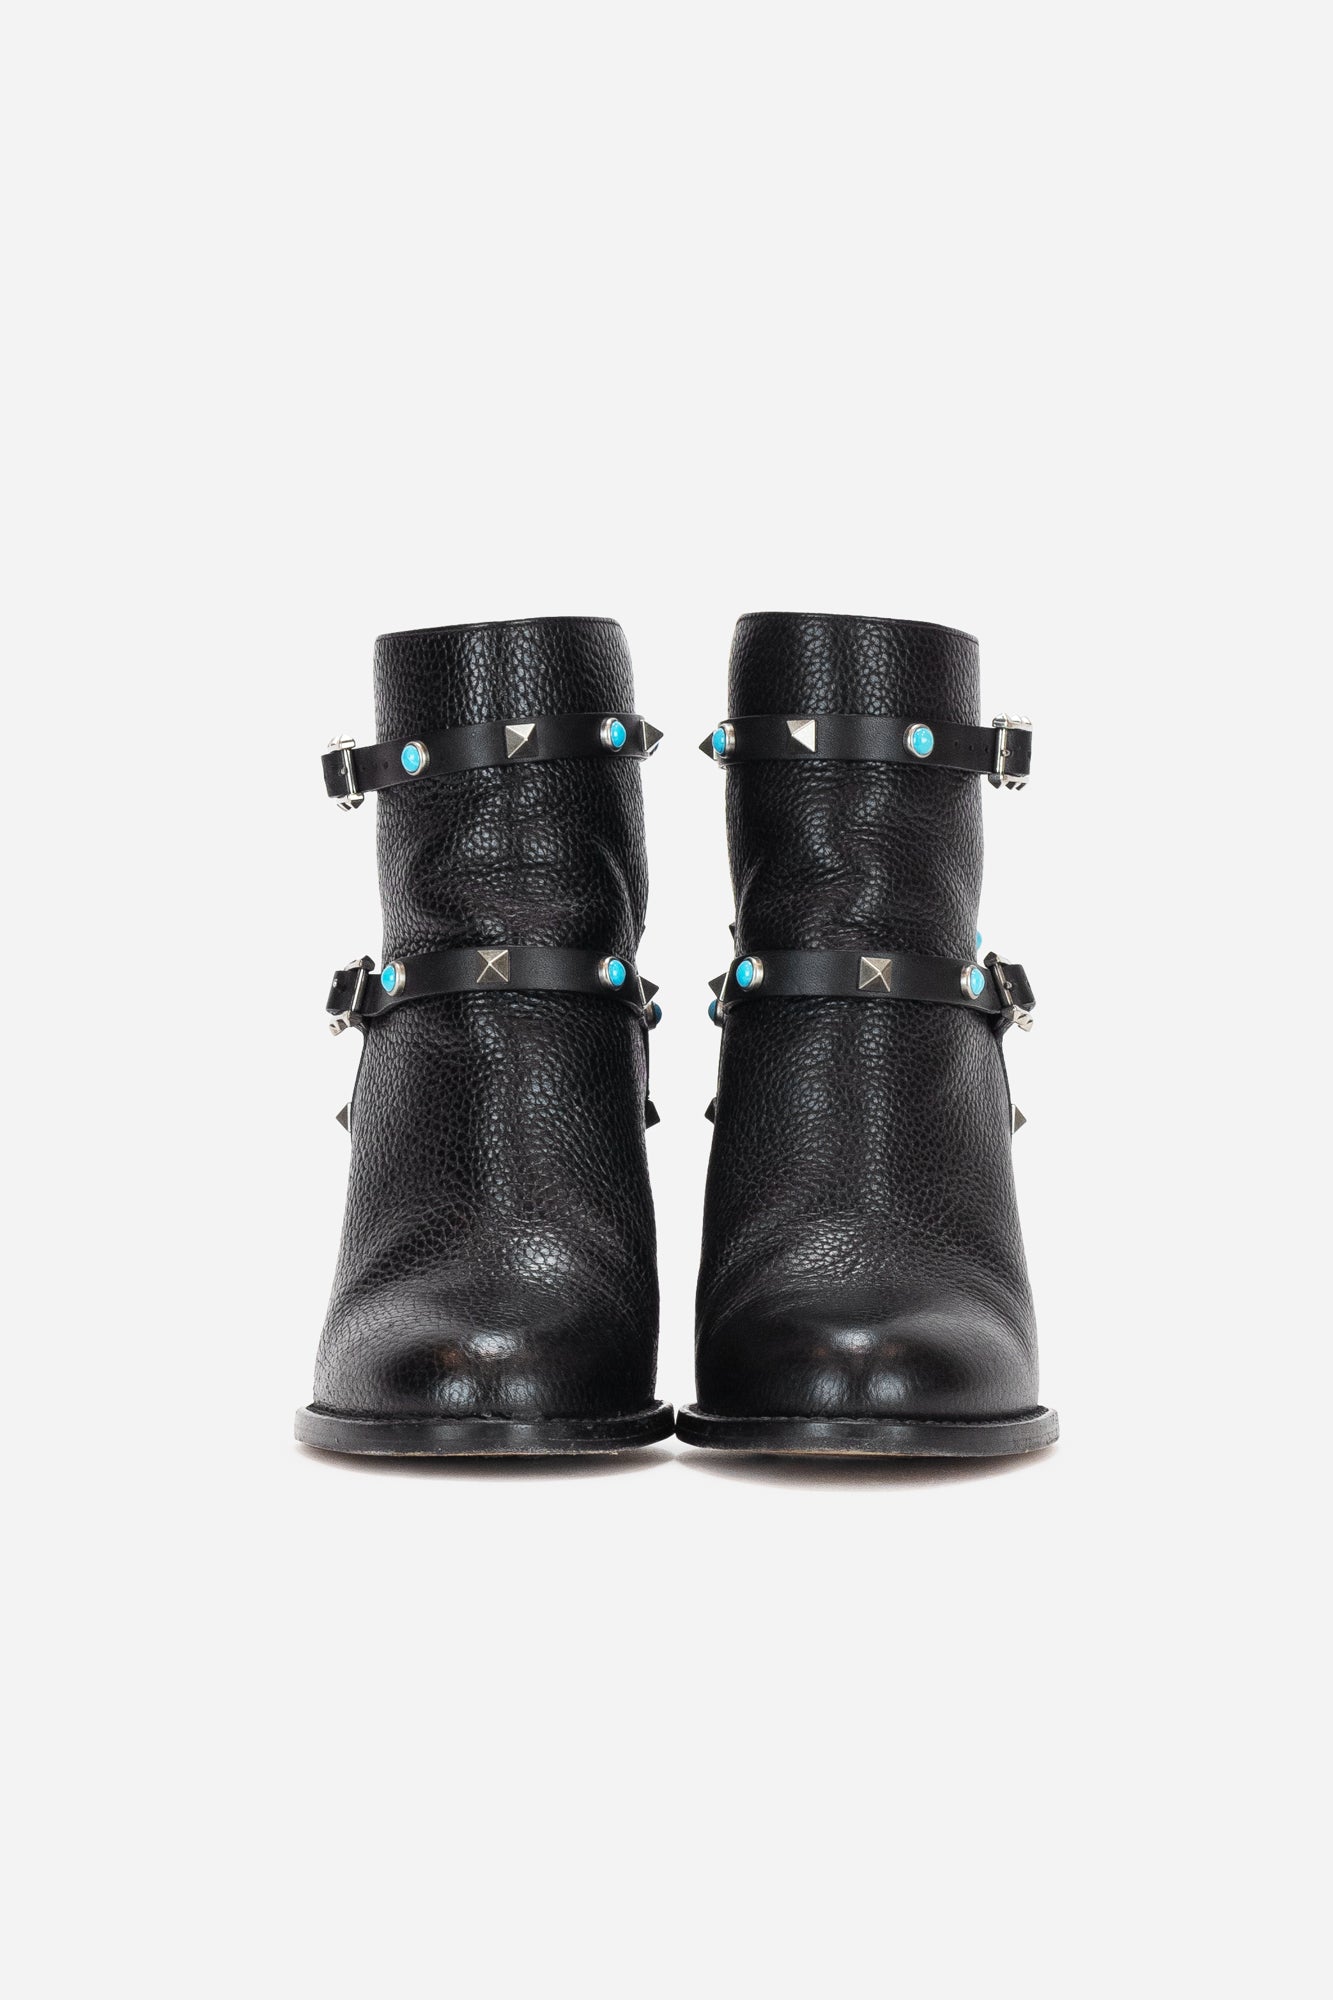 Black Leather Rockstud Booties with Turquoise Details